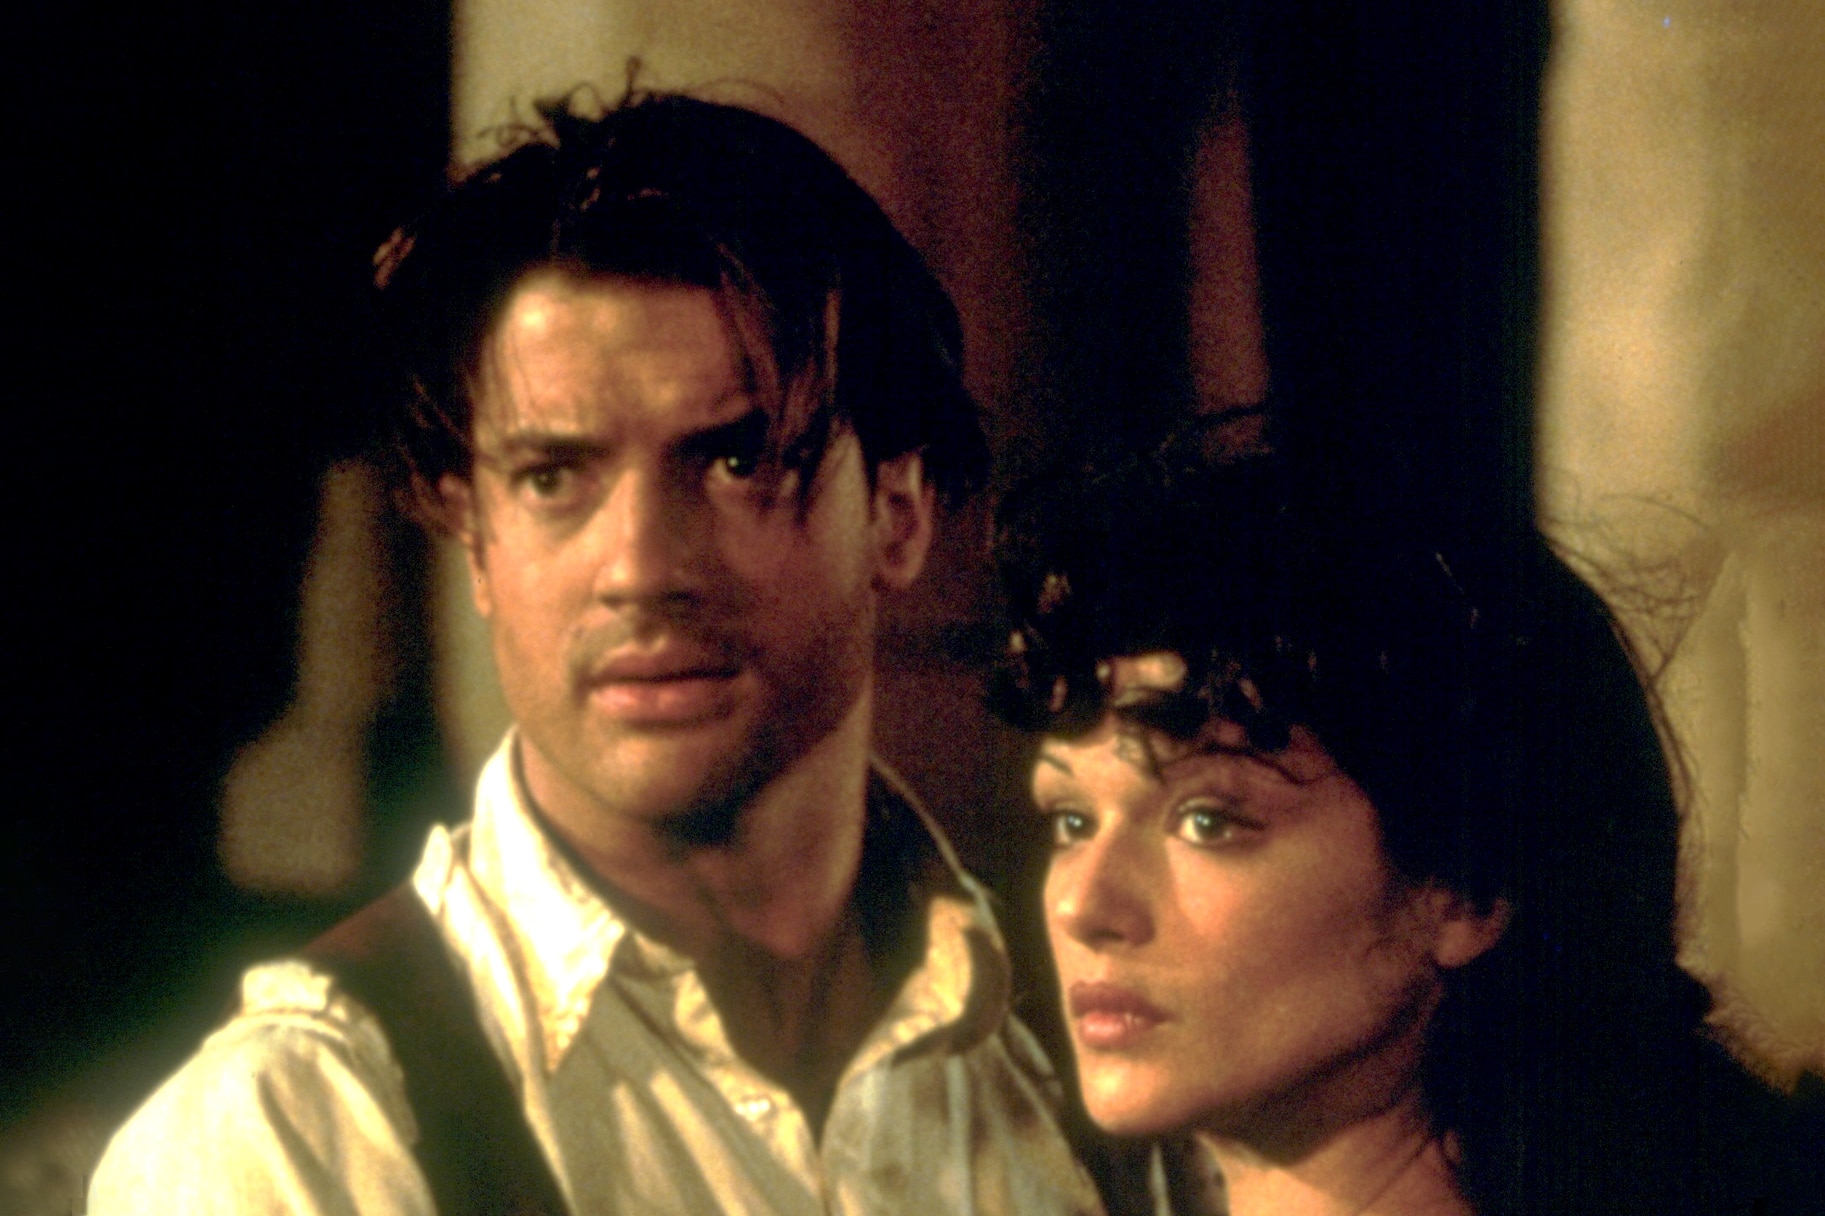 Rachel Weisz and Brendon Fraser during the filming of The Mummy